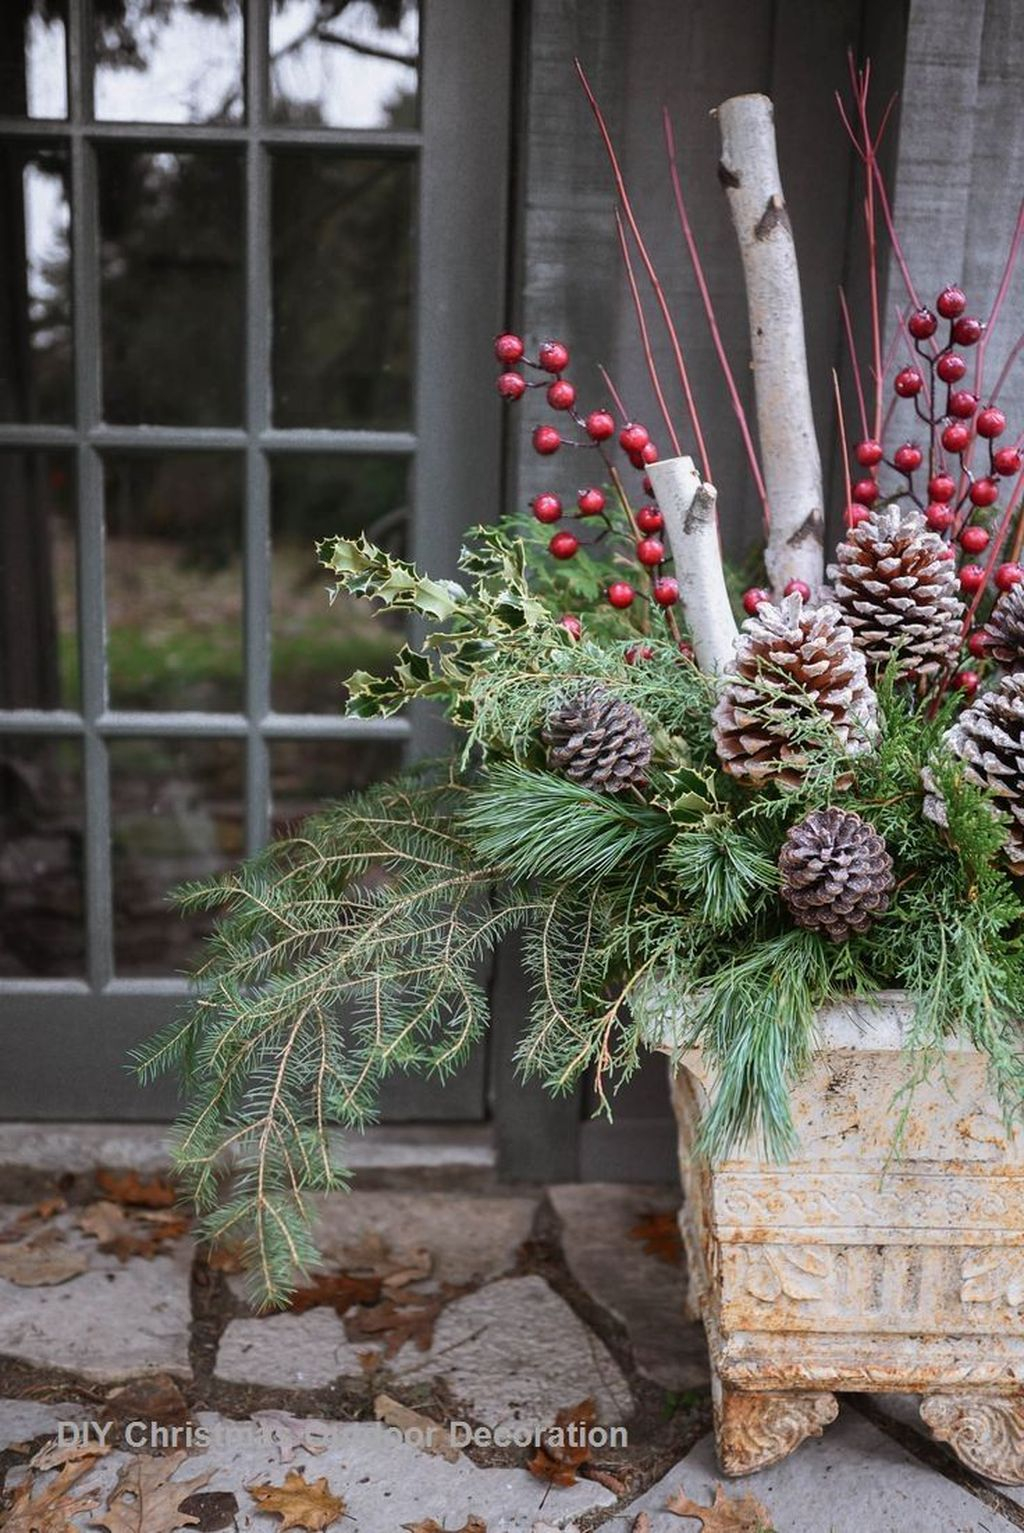 Marvelous Outdoor Holiday Planter Ideas To Beauty Porch Décor 43